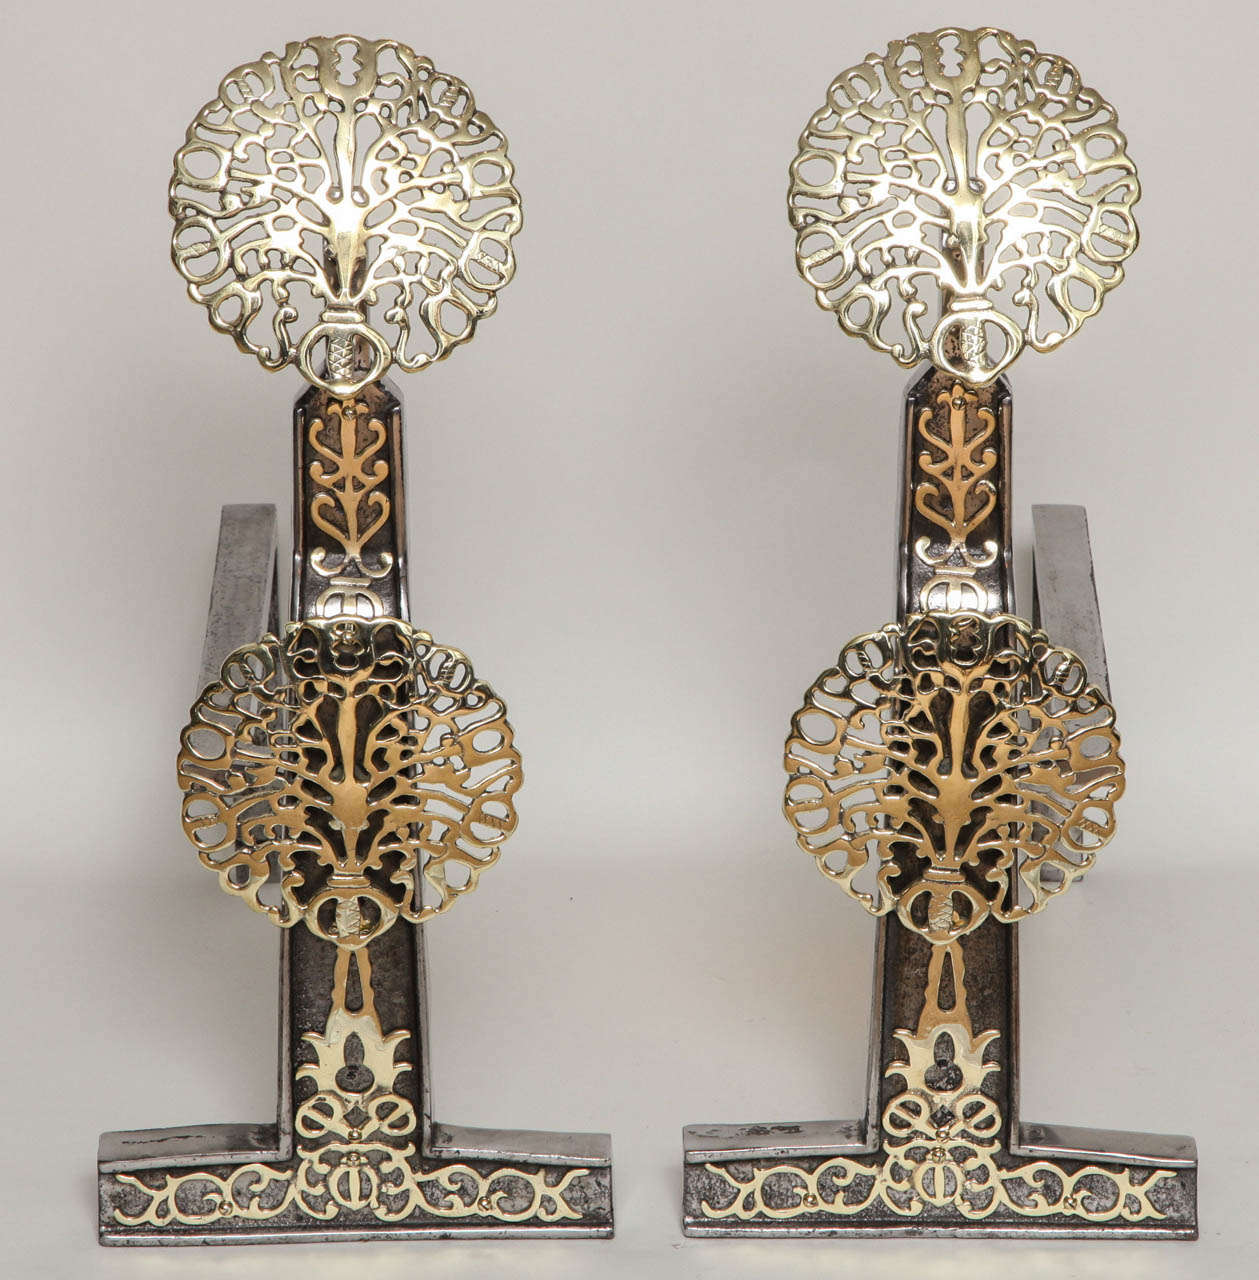 An exceptional pair of English andirons, possibly by Earnest Gimson having double blossom brass bosses applied to and iron backing, the shaft having similar applied pierced decoration, all of very fine quality.  See the Cheltenham Museum collection